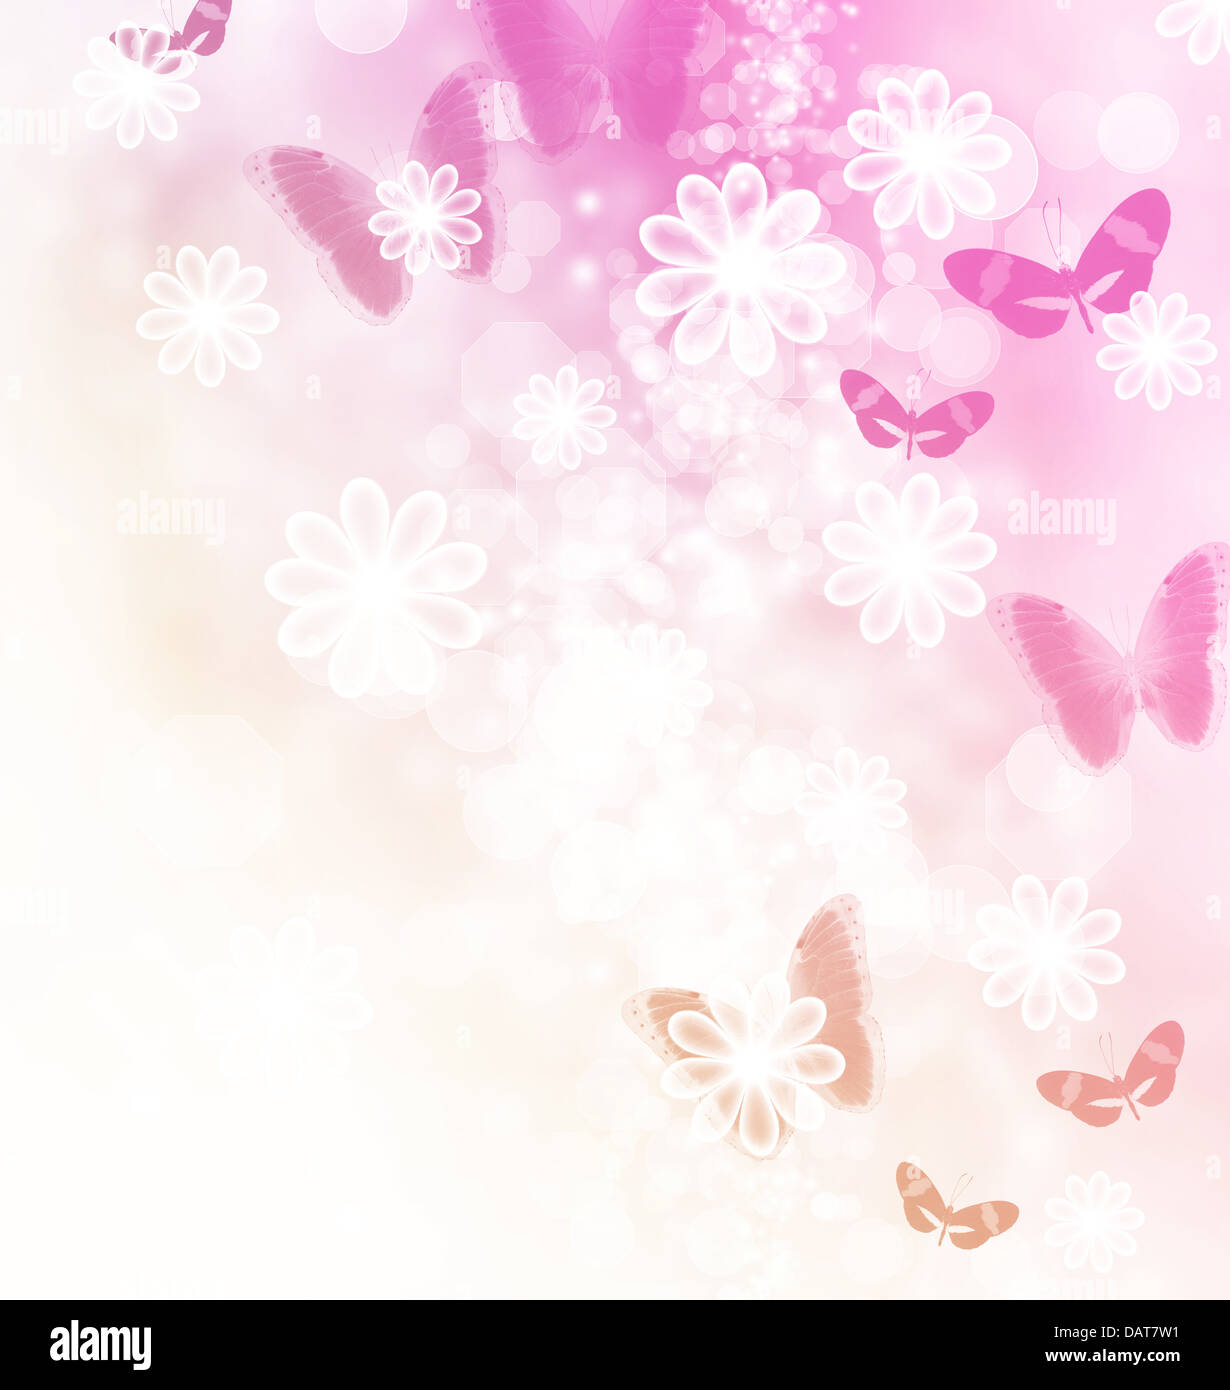 Blossoms and butterflies pastel illustration Stock Photo